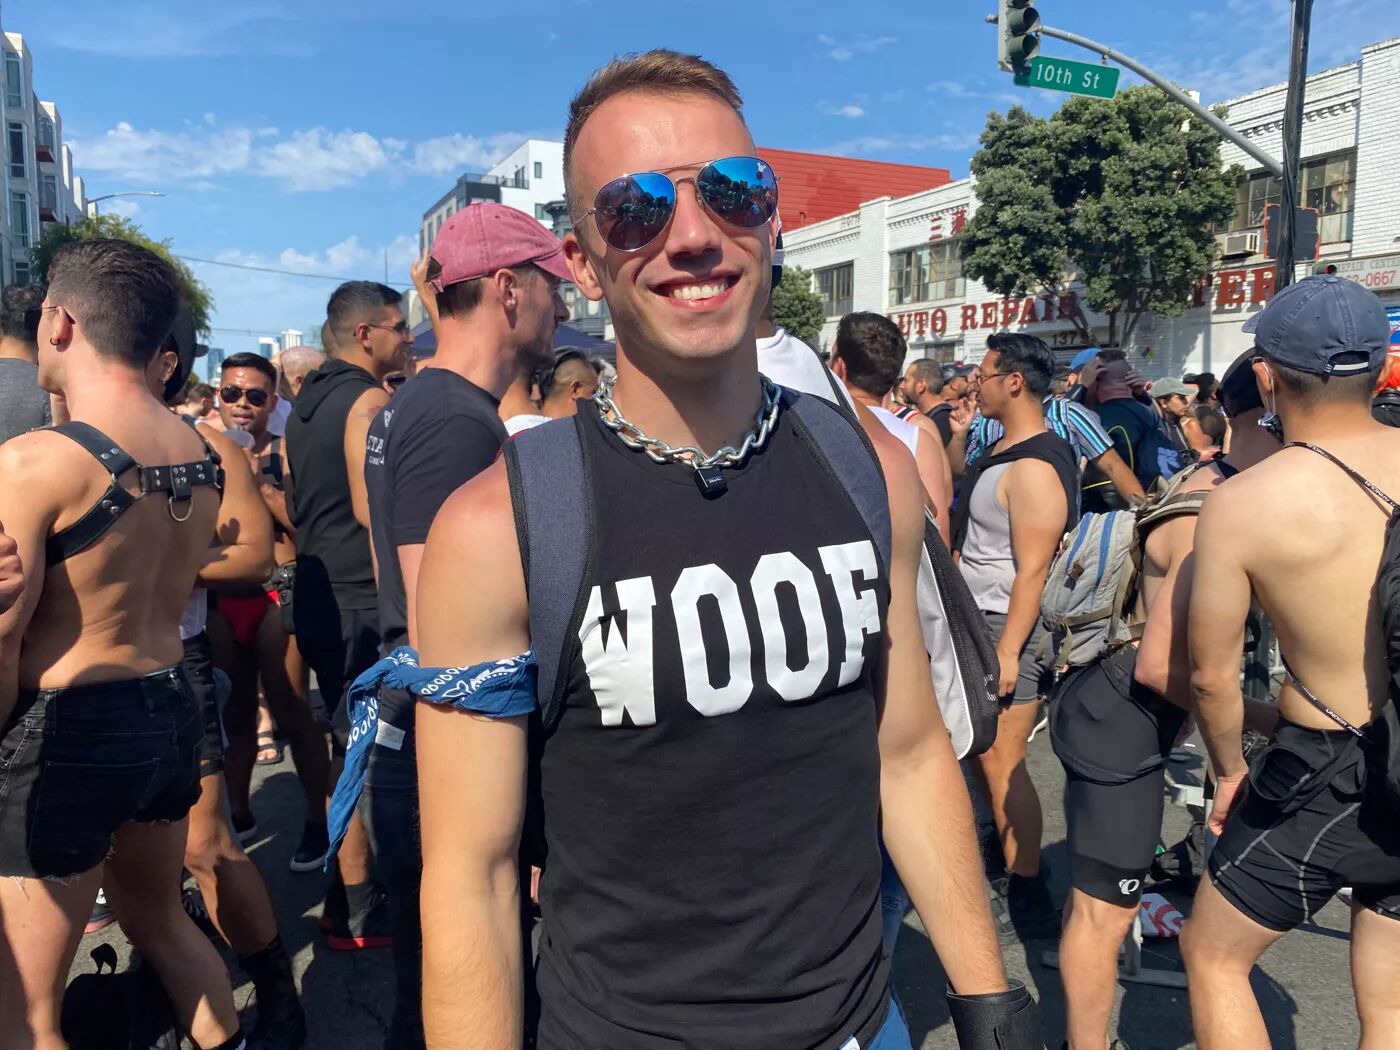 A smiling man stands in a crowd wearing a shirt that says Woof and a chain collar with a lock on it. 